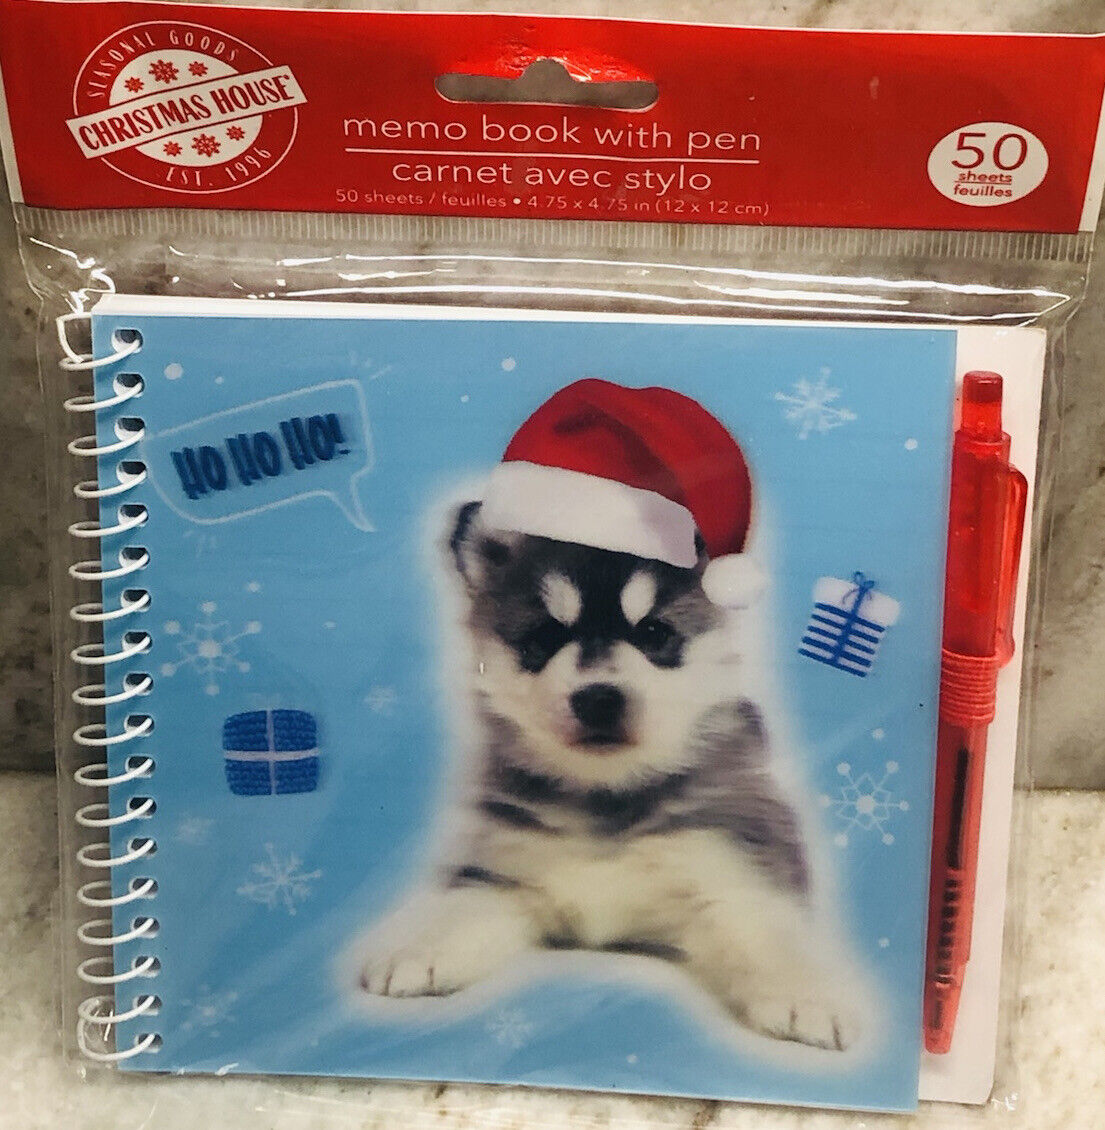 Ship N 24 Hours. New-Christmas House Petpals Memo Book W/ Pen. 50 Sheets. 12x12c